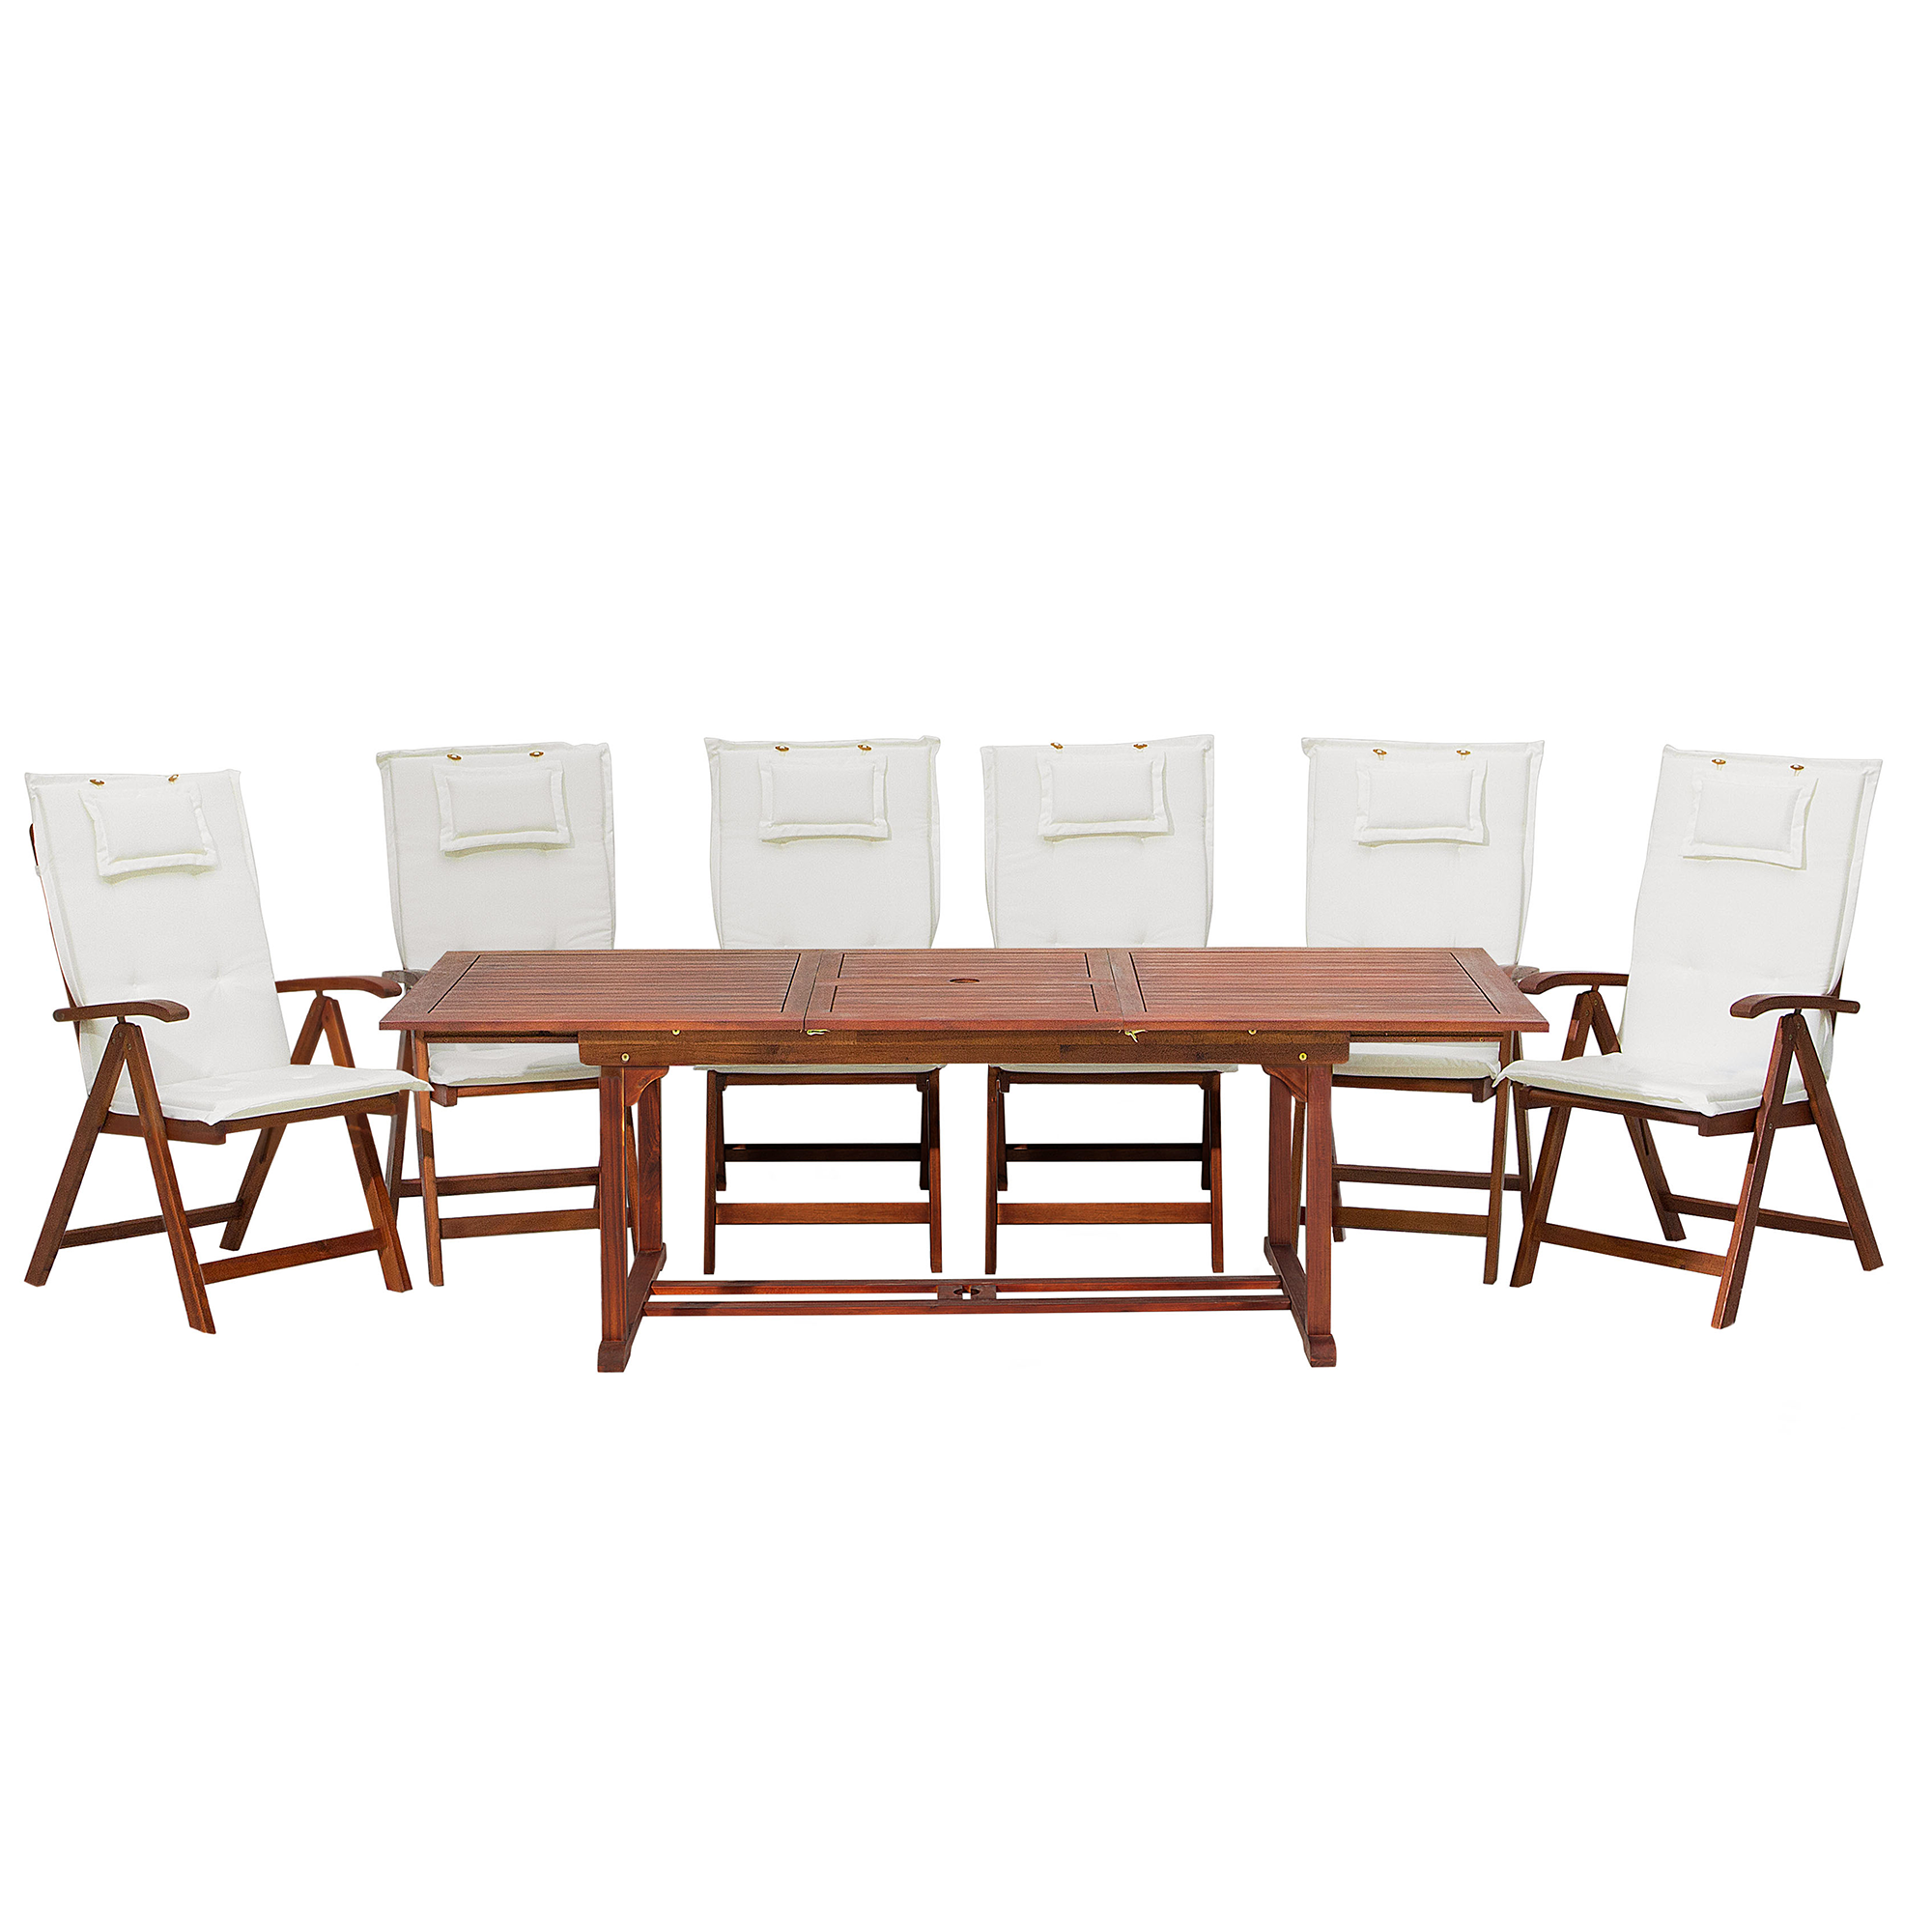 Beliani Garden Dining Set Dark Acacia Wood with Off-White Cushions Adjustable Folding Outdoor Chairs 6 Seater Table